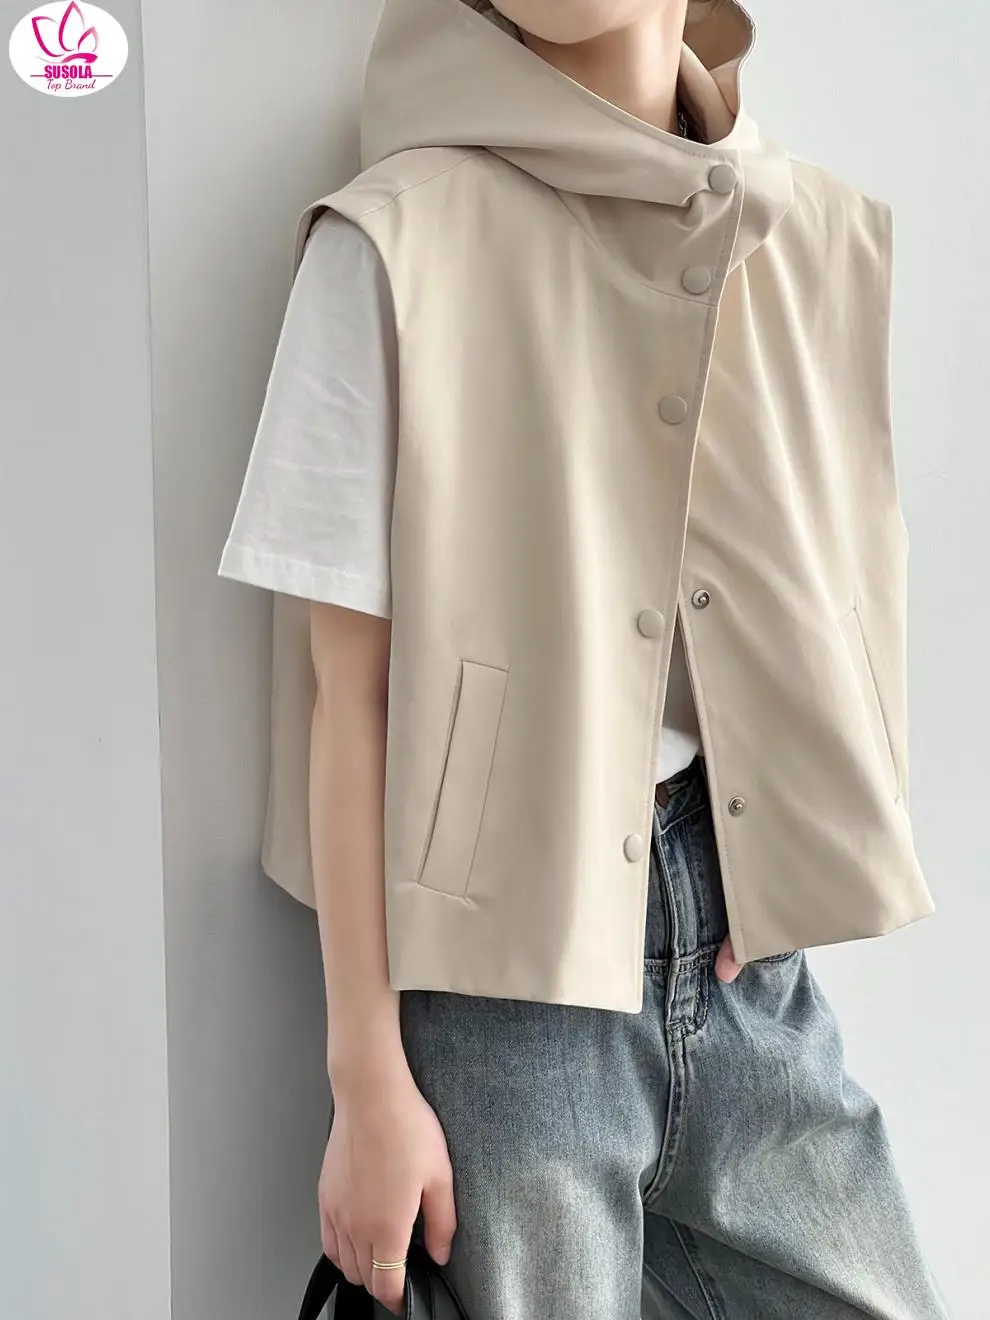 

SUSOLA Sleeveless Vests for Women Casual Hooded Top 2024 Cardigan Korean Version of The Shoulders Section Sleeveless Jacket